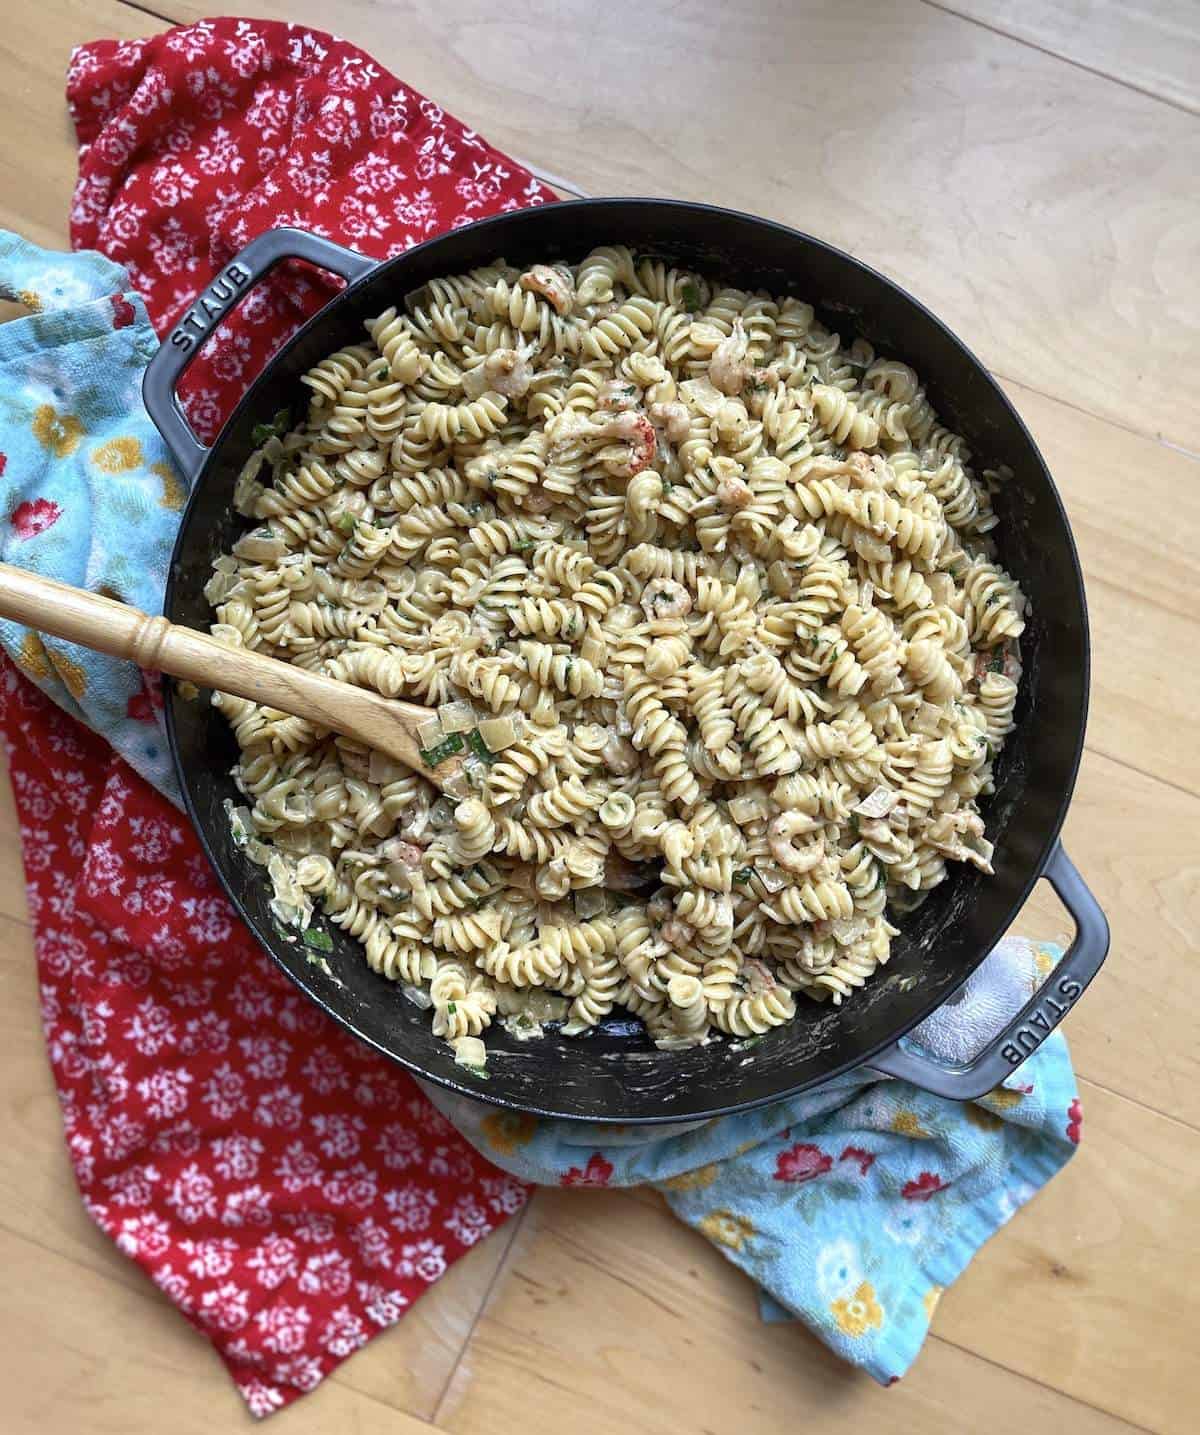 Crawfish Monica in a large skillet with a wooden spoon and two towels.